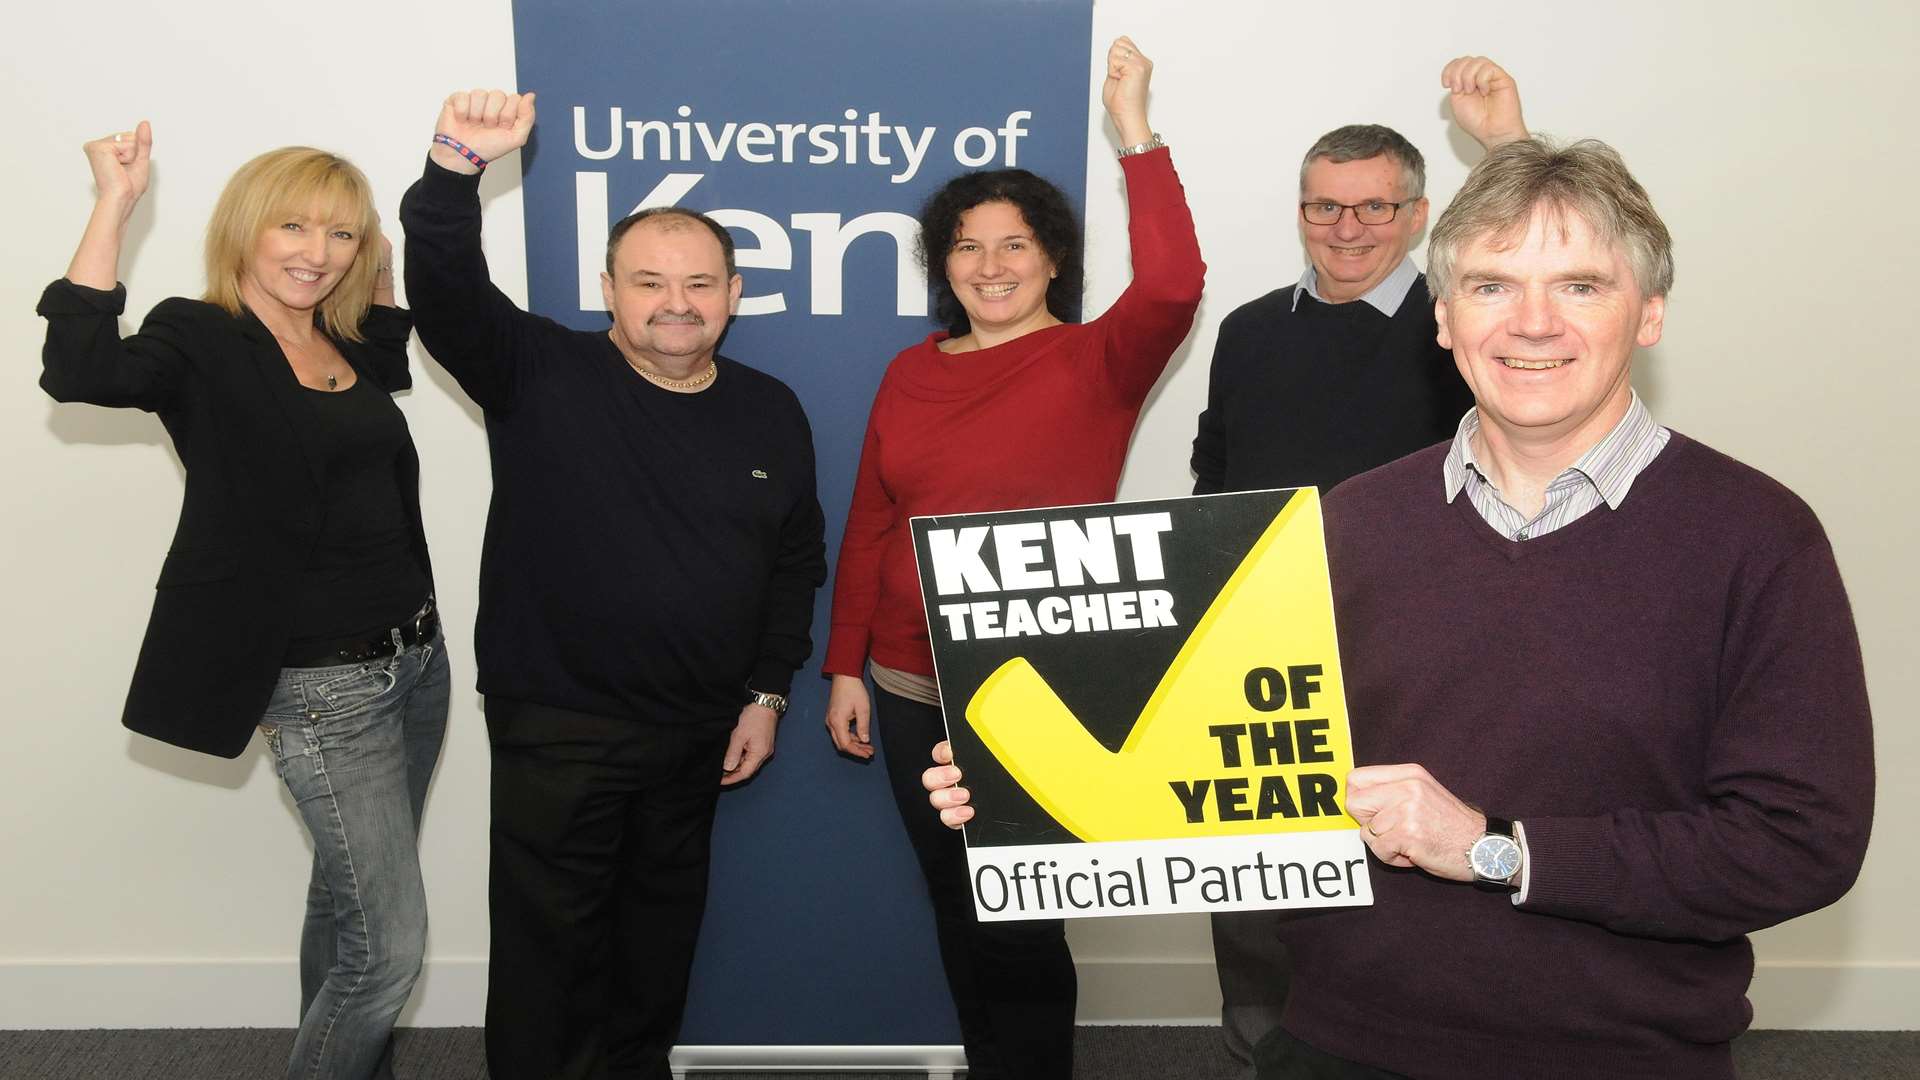 The University of Kent is playing a leading role in the Kent Teacher of the Year Awards 2016 which are now open for nominations. Pictured: senior staff from the politics, maths, physics, foreign language, history and bioscience departments.